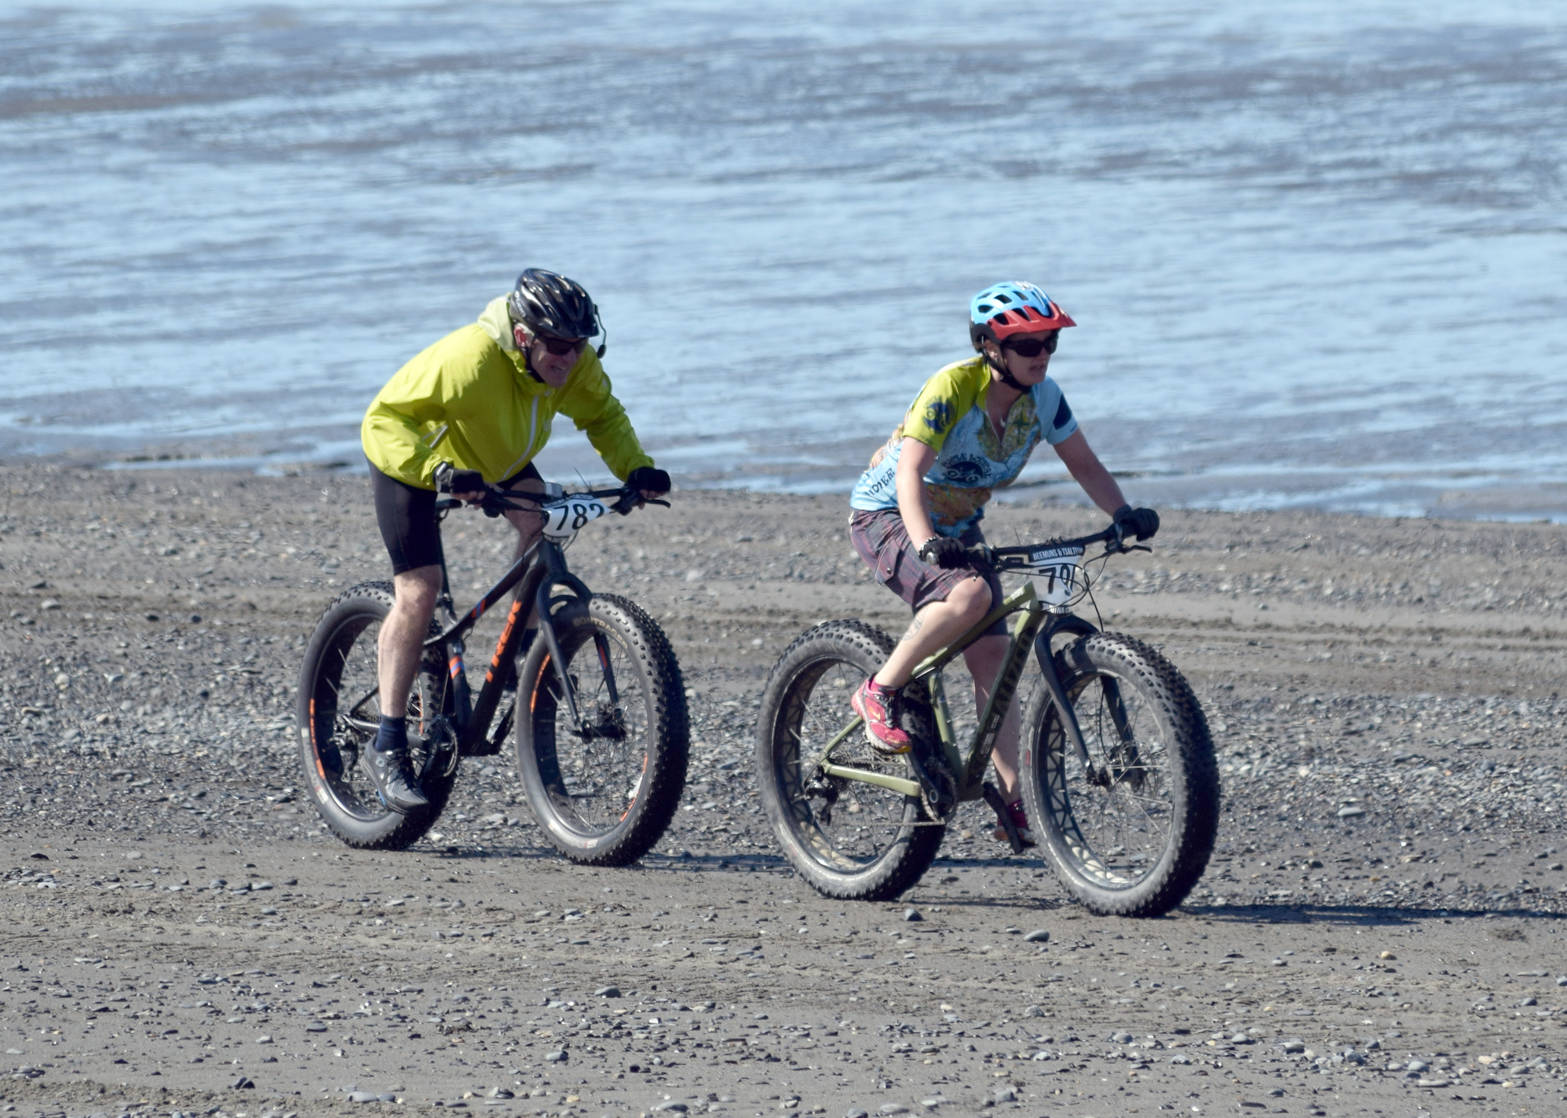 Catriona Reynolds finishes off a victory in the 10-mile bike at the Mouth to Mouth Wild Run and Ride on Monday, May 28, 2018, at the Kenai beach. On Reynolds’ tail is Sky Carver. (Photo by Jeff Helminiak/Peninsula Clarion)